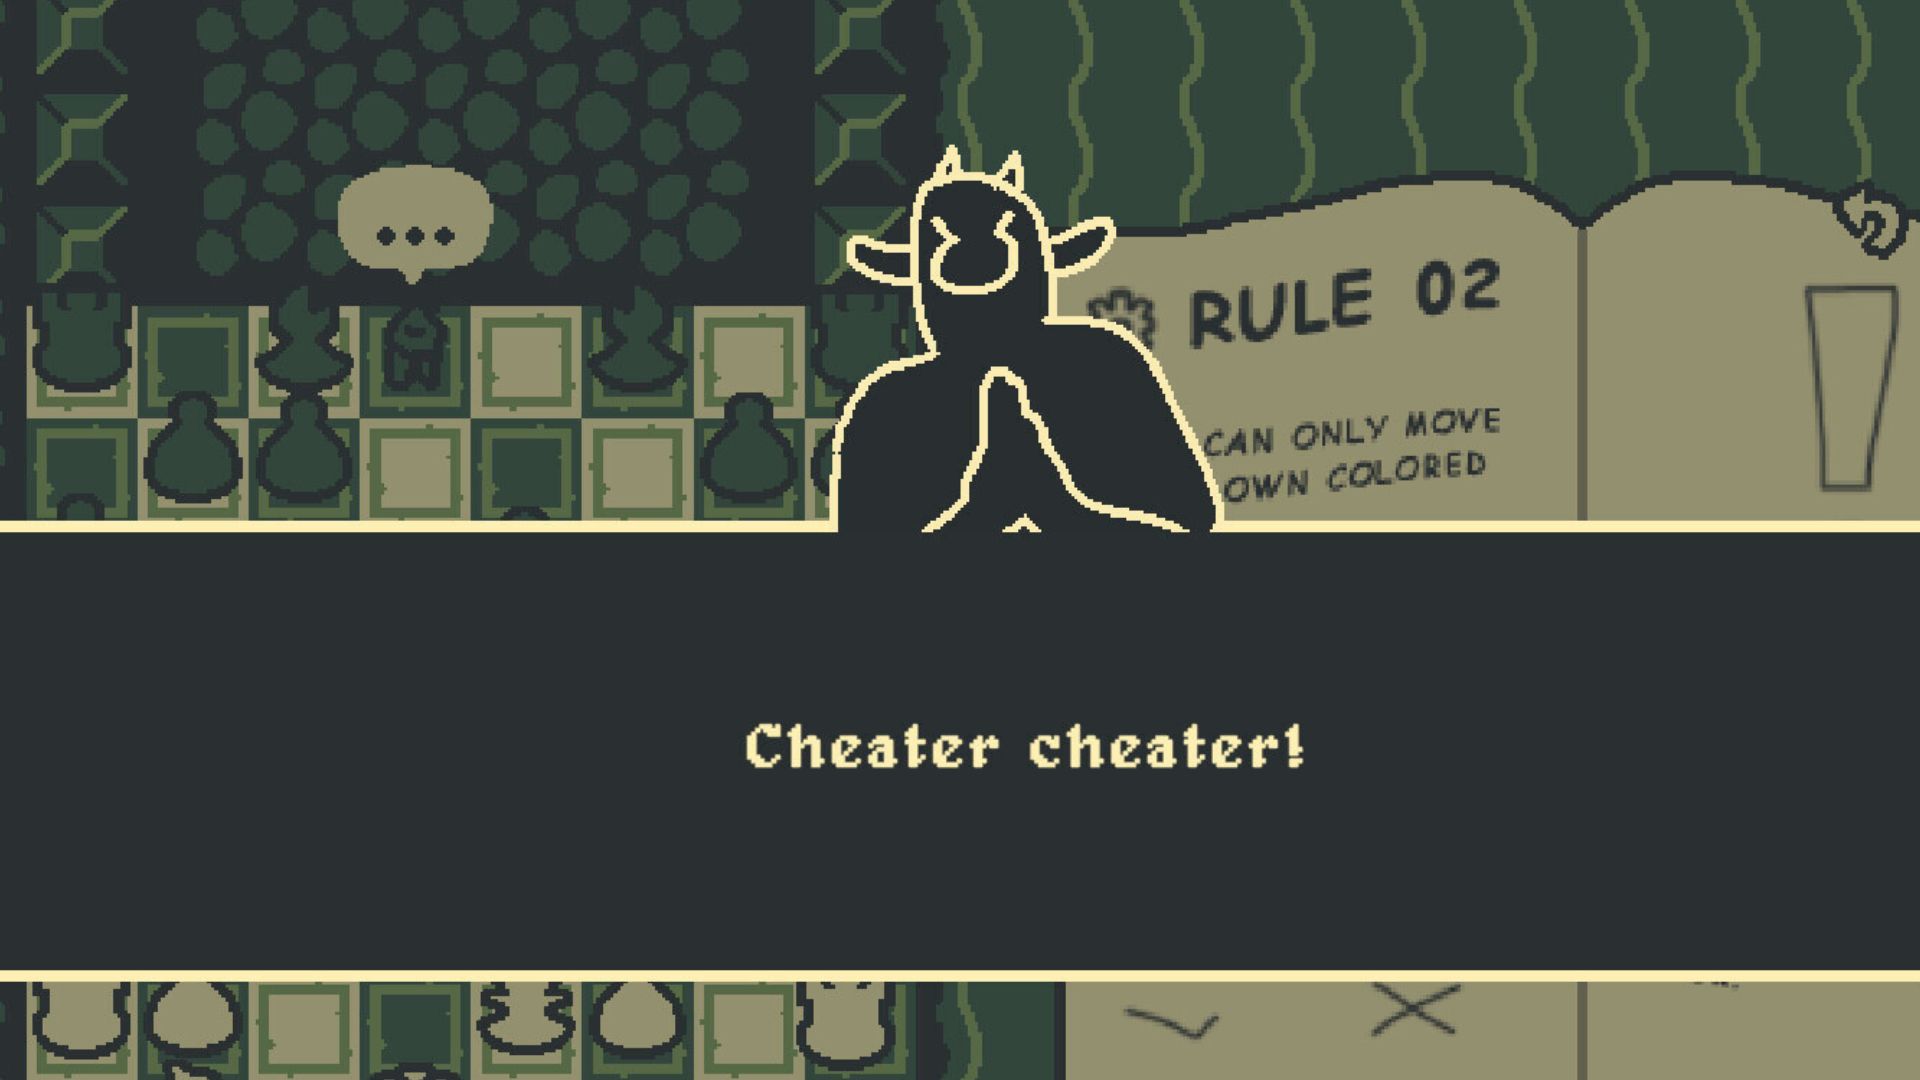 Inventive $3 Steam indie has you playing a cheating troll at chess